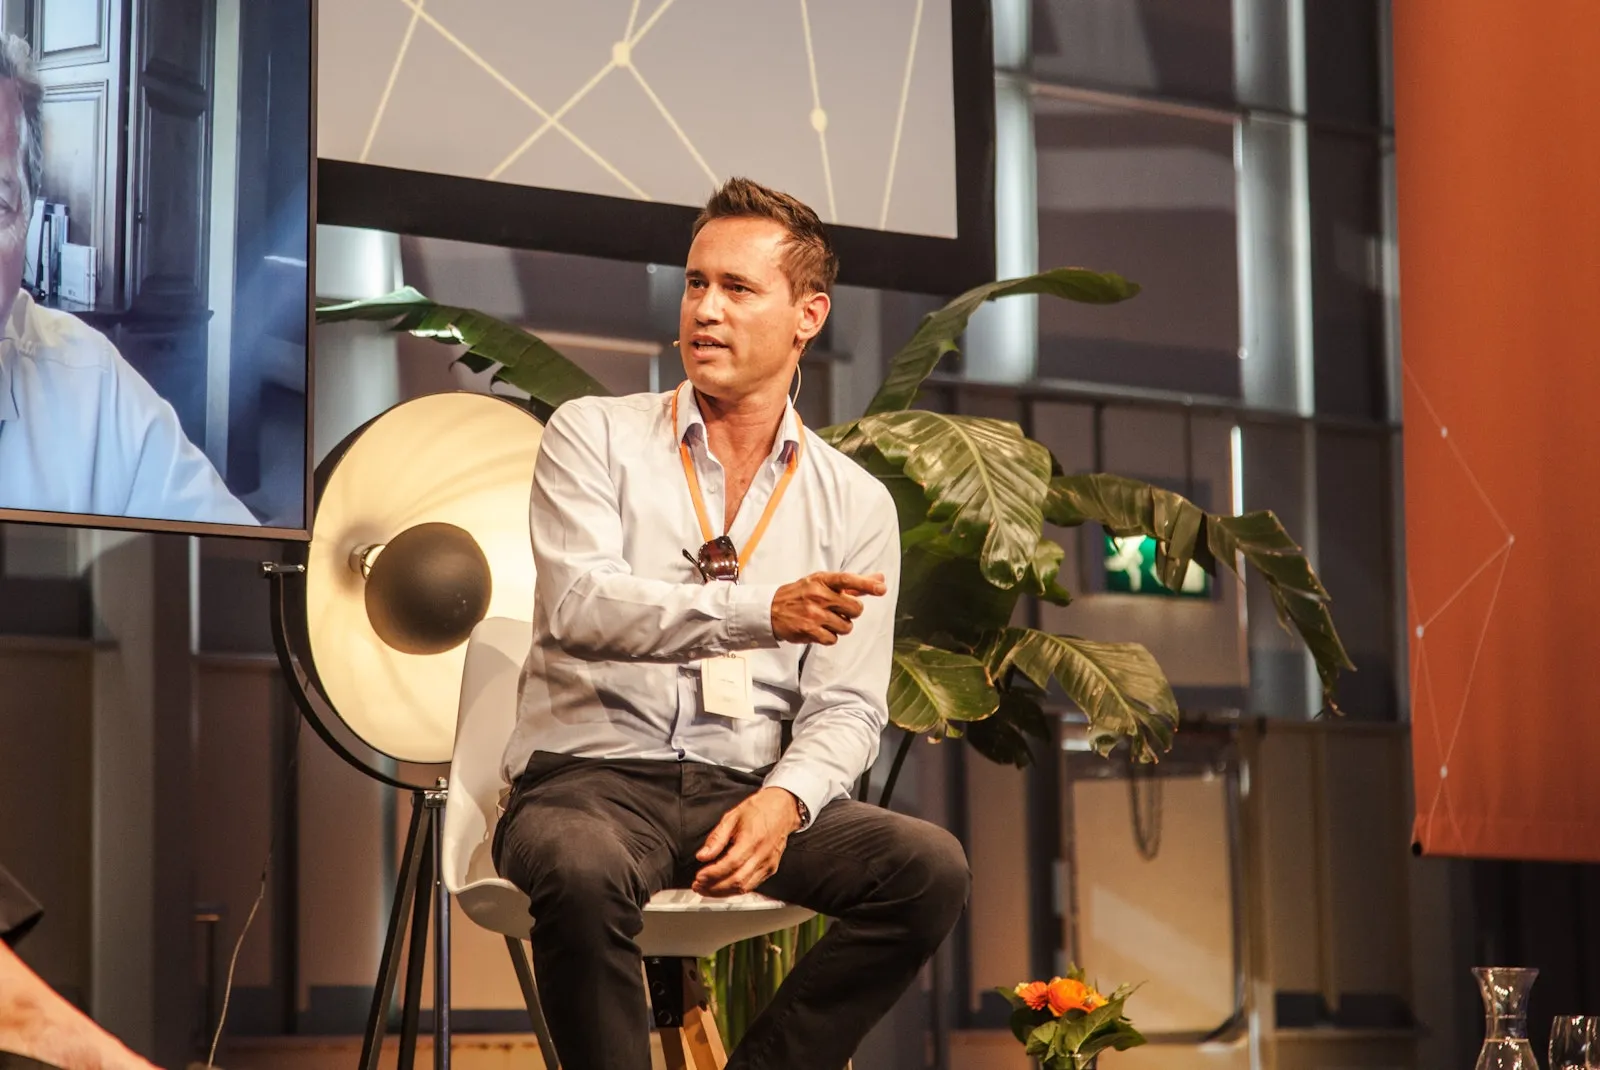 Picnic's Jitse Groen as a speaker at the launch of techleap's founder community.webp